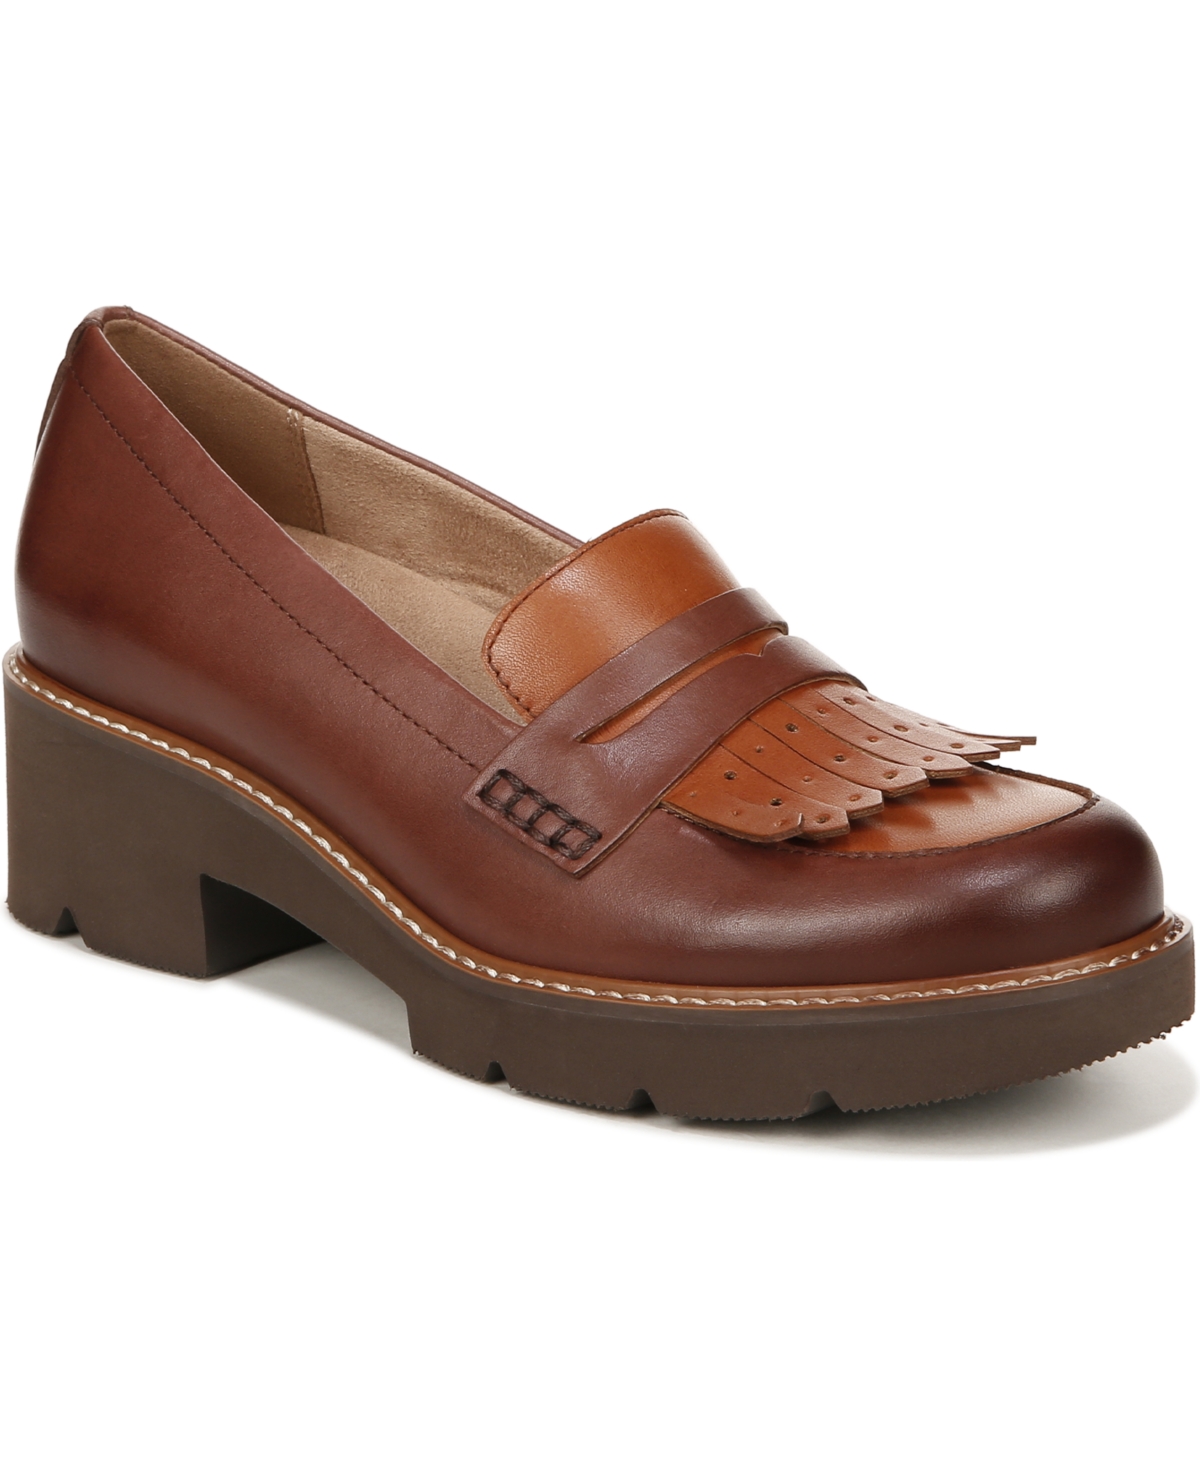 Naturalizer Darcy Lug Sole Loafers In Brown Multi Leather